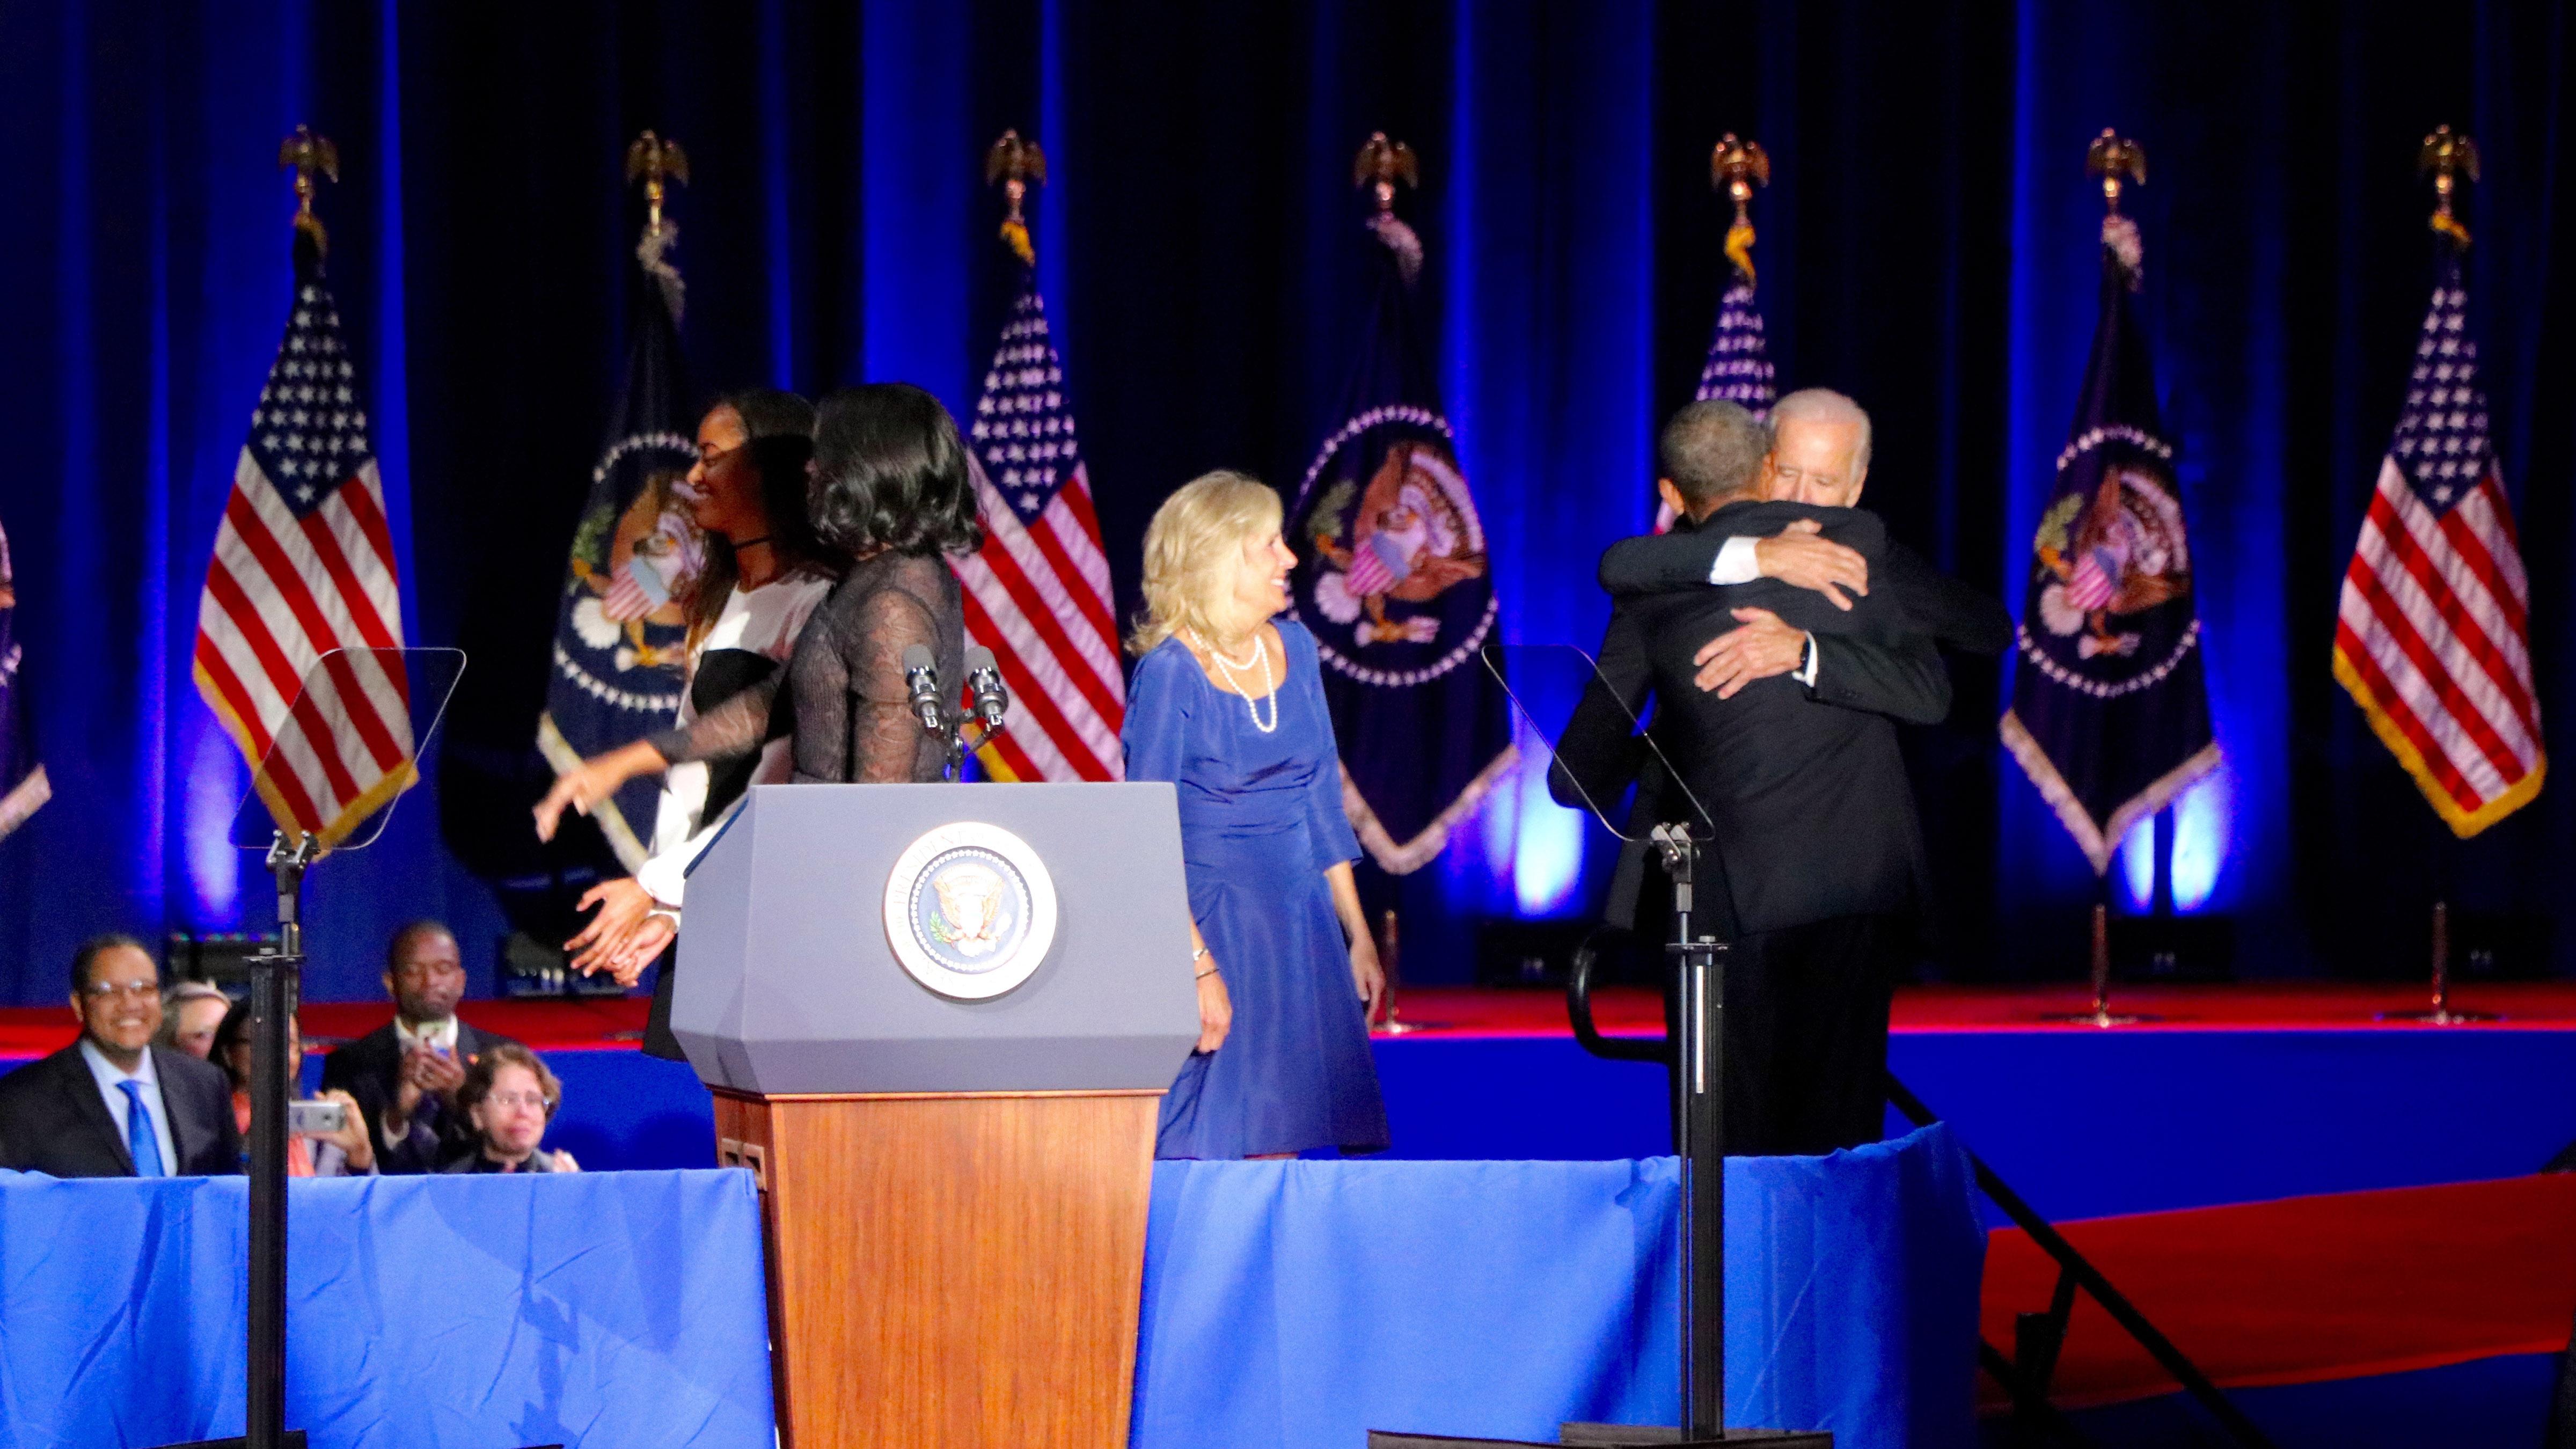 The president and vice president embrace onstage. (Evan Garcia / Chicago Tonight)